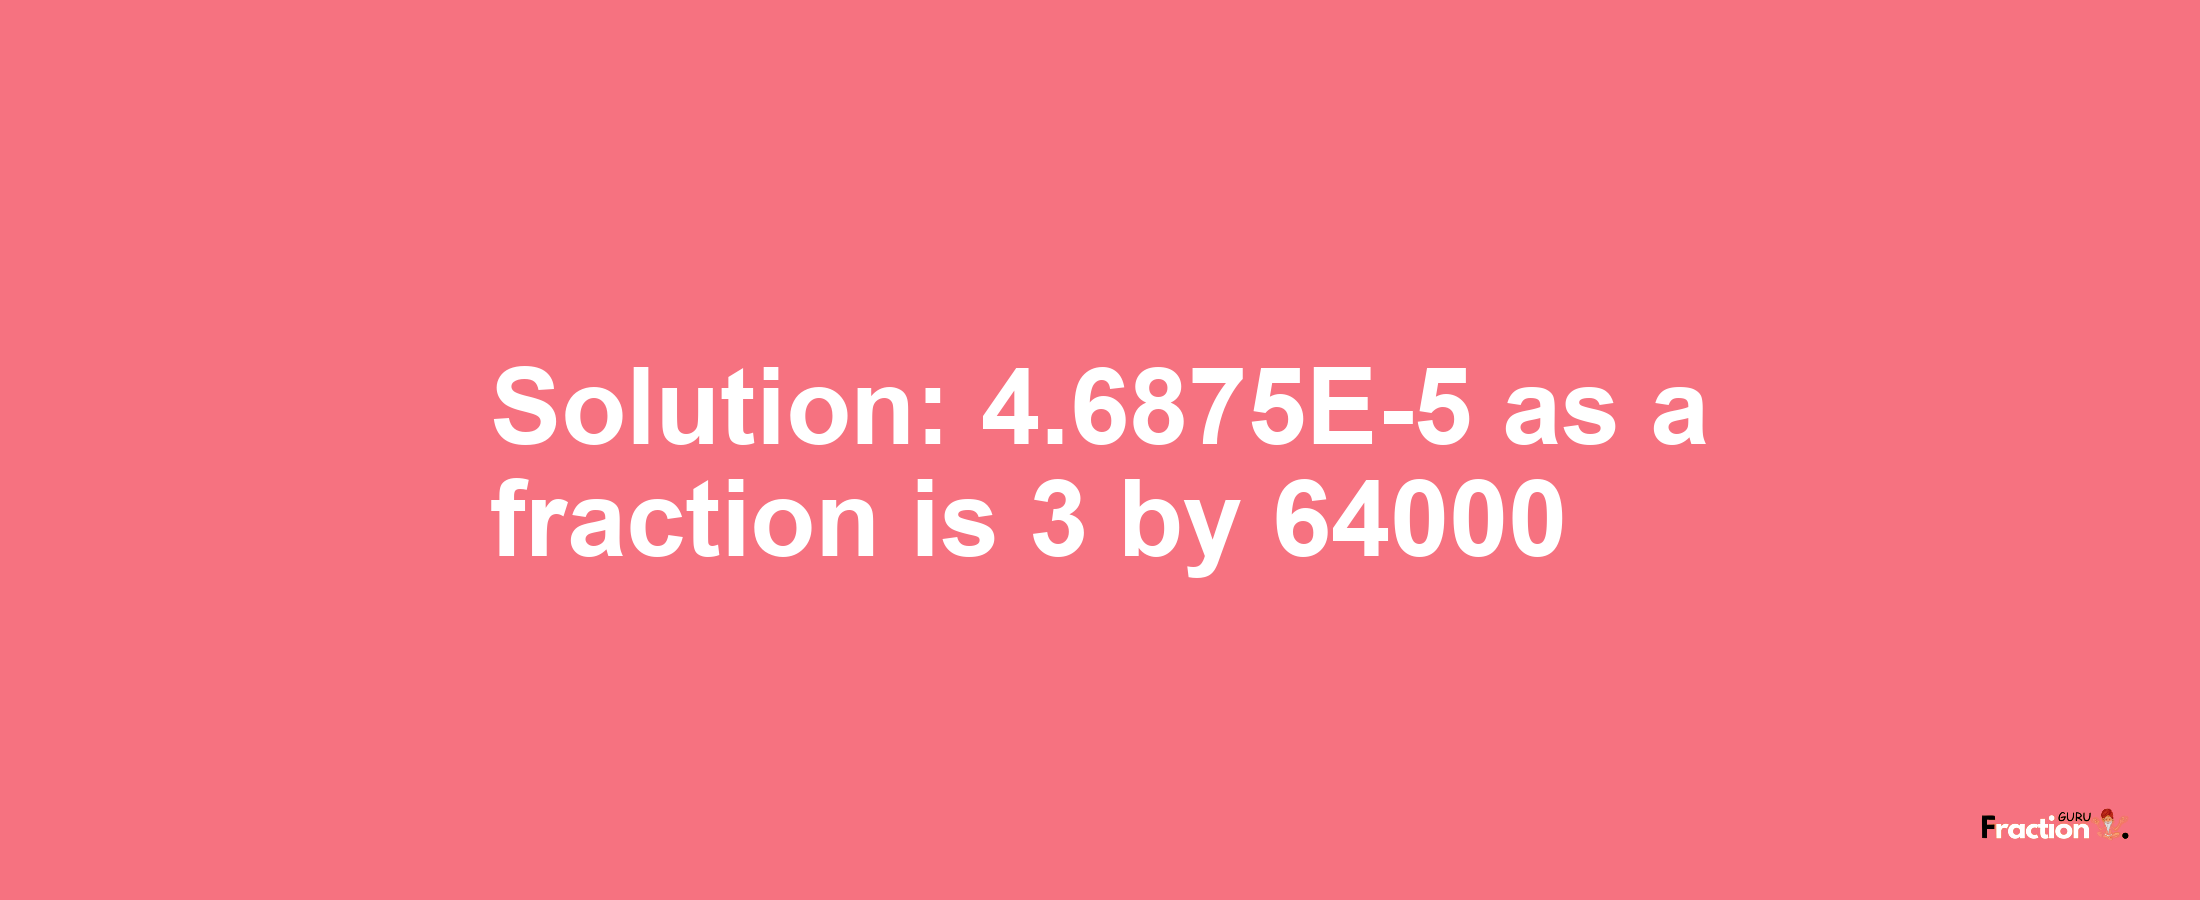 Solution:4.6875E-5 as a fraction is 3/64000